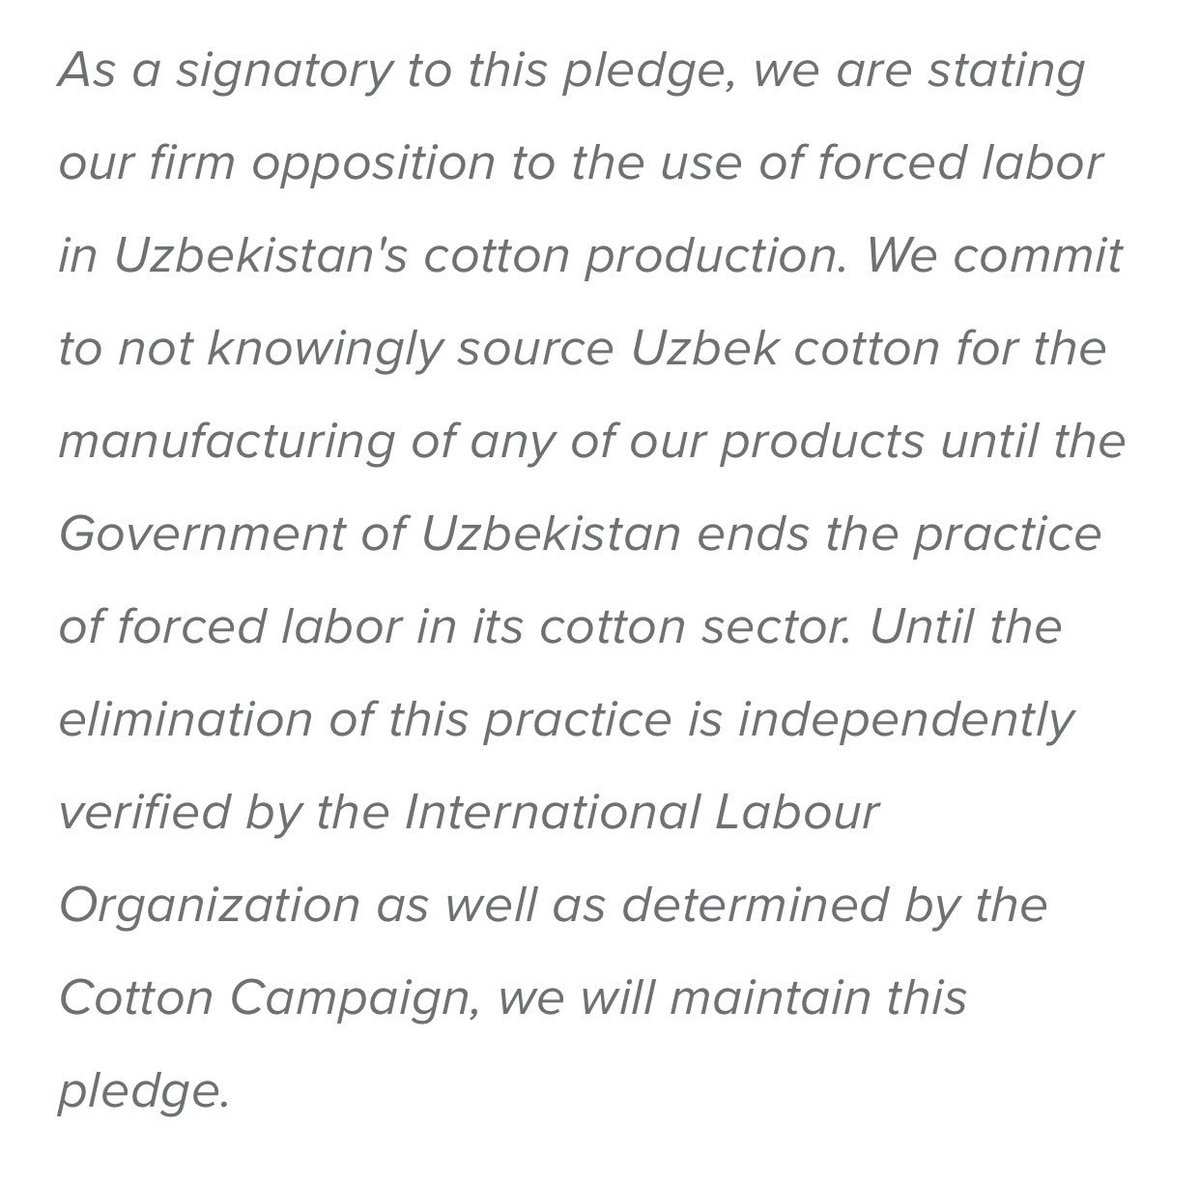 Over time, other organisations unravelled the complex supply chain issues, and hundreds of clothing firms - major global brands - signed the “Uzbek Cotton Pledge”. Less demand for their product lowered the price: the government was feeling the pressure. 6/  https://www.sourcingnetwork.org/uzbek-cotton-pledge